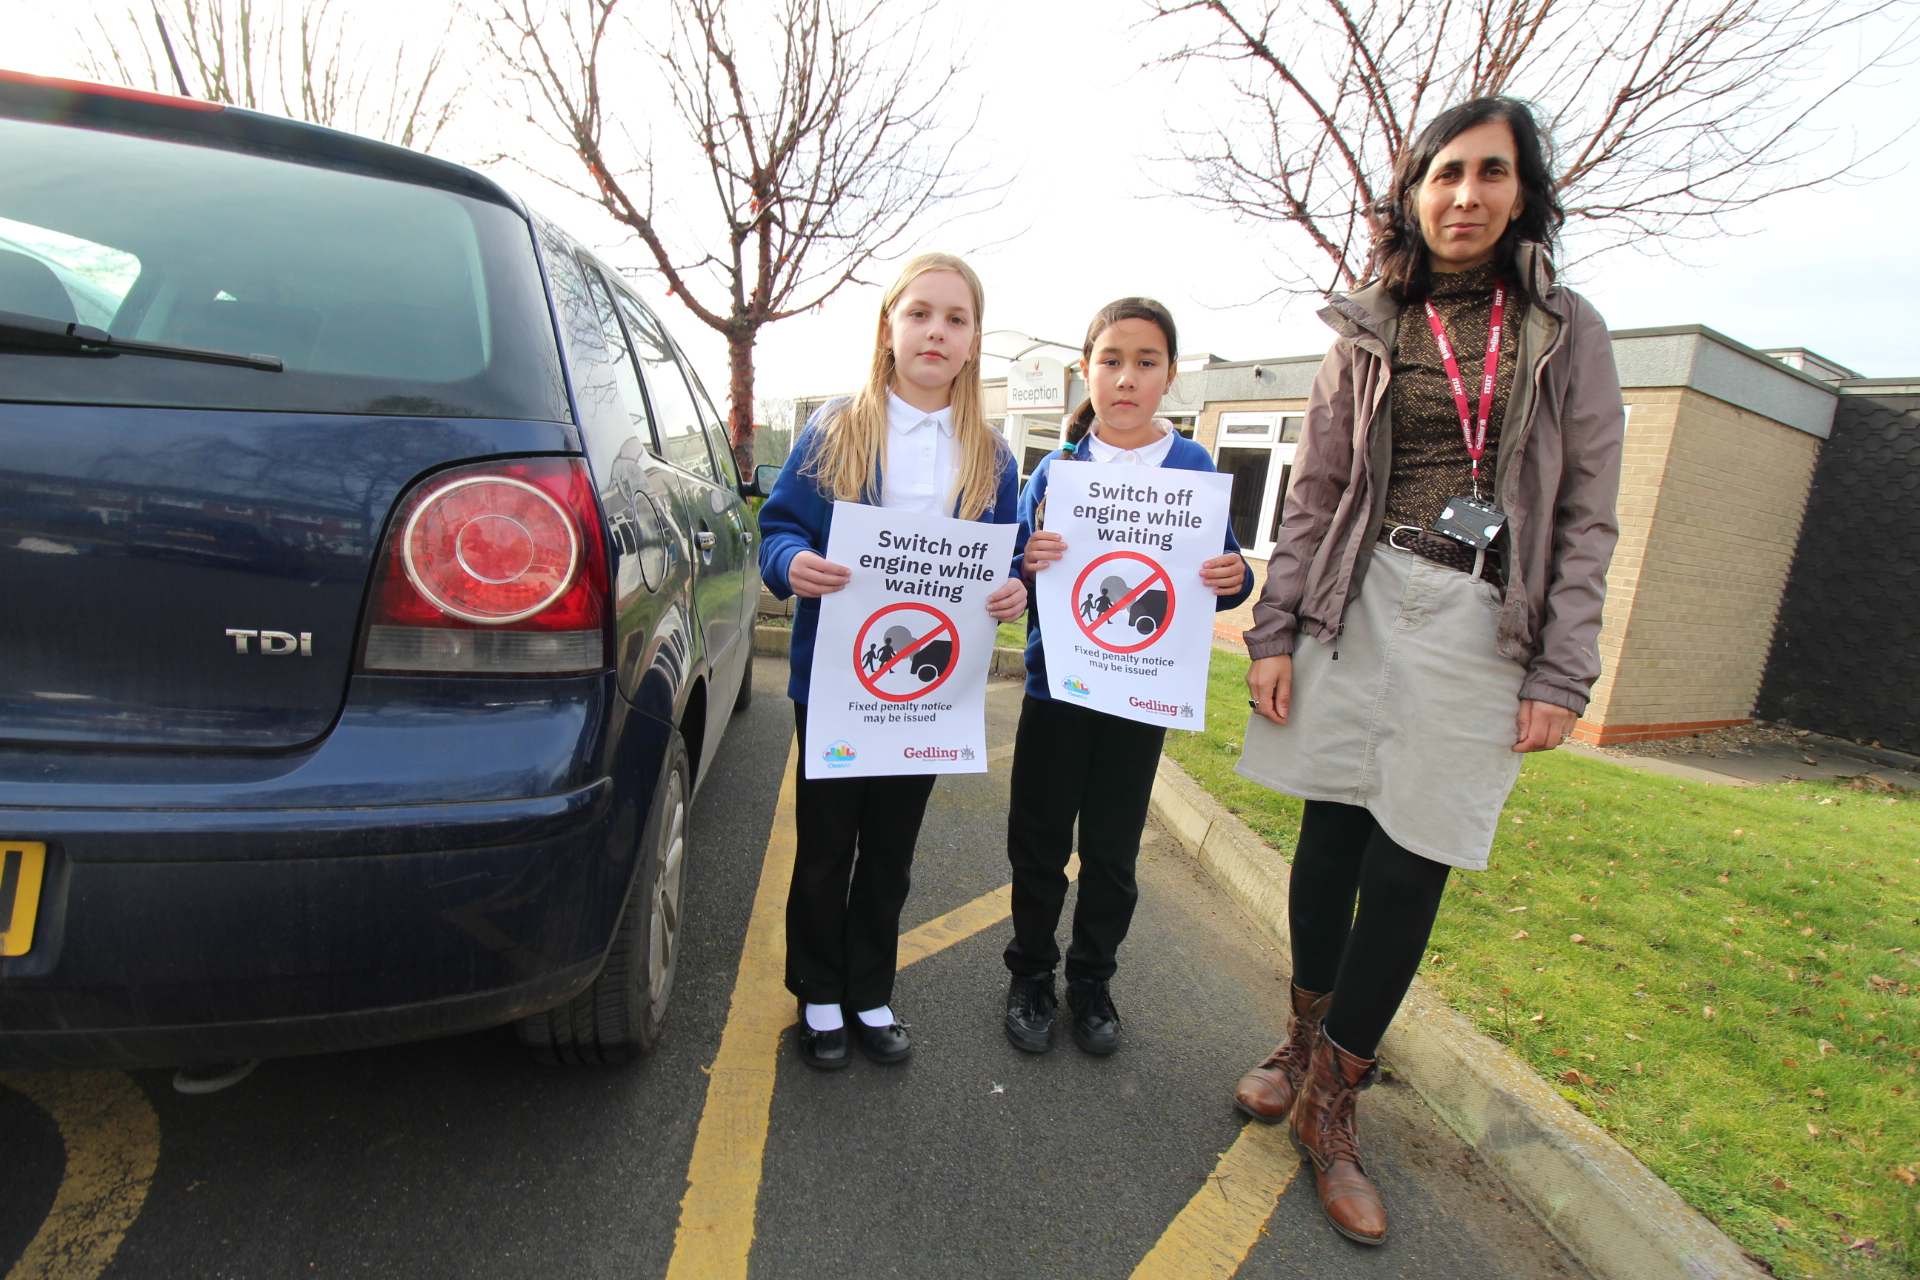 Left to Right – Faye Garrard and Lyra Jagessar from Ernhale Junior School with Gedling Borough Council Climate Change Officer Sim Duhra stood in a school car park next to a dark blue car. Both School children are holding signs which read 